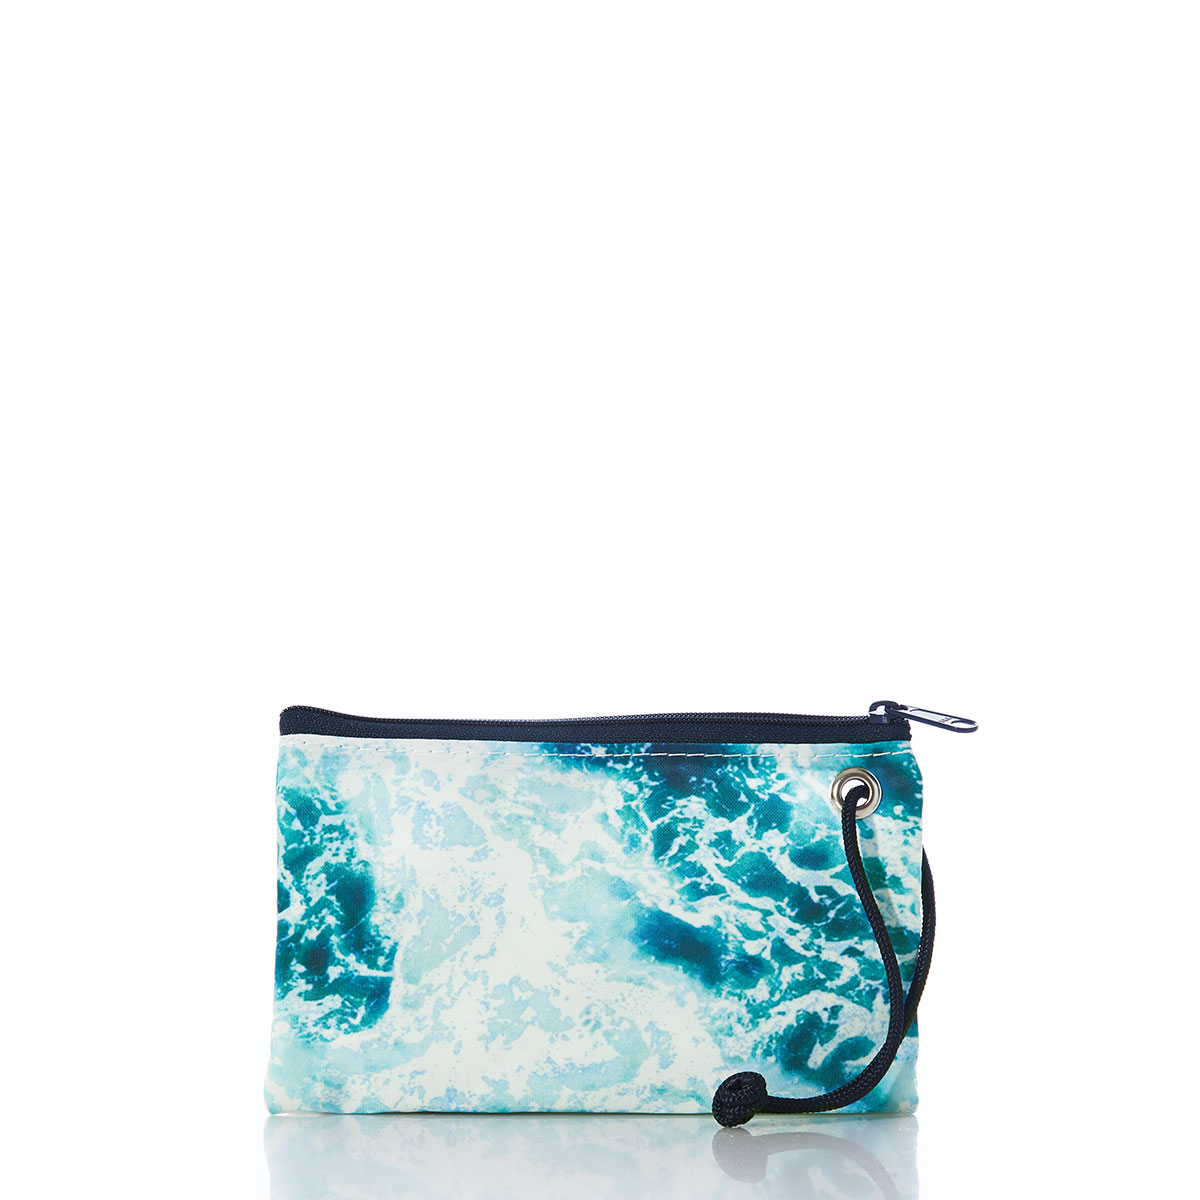 a recycled sail cloth wristlet is printed with a scene of crashing waves upon a shore in bright shades of blue